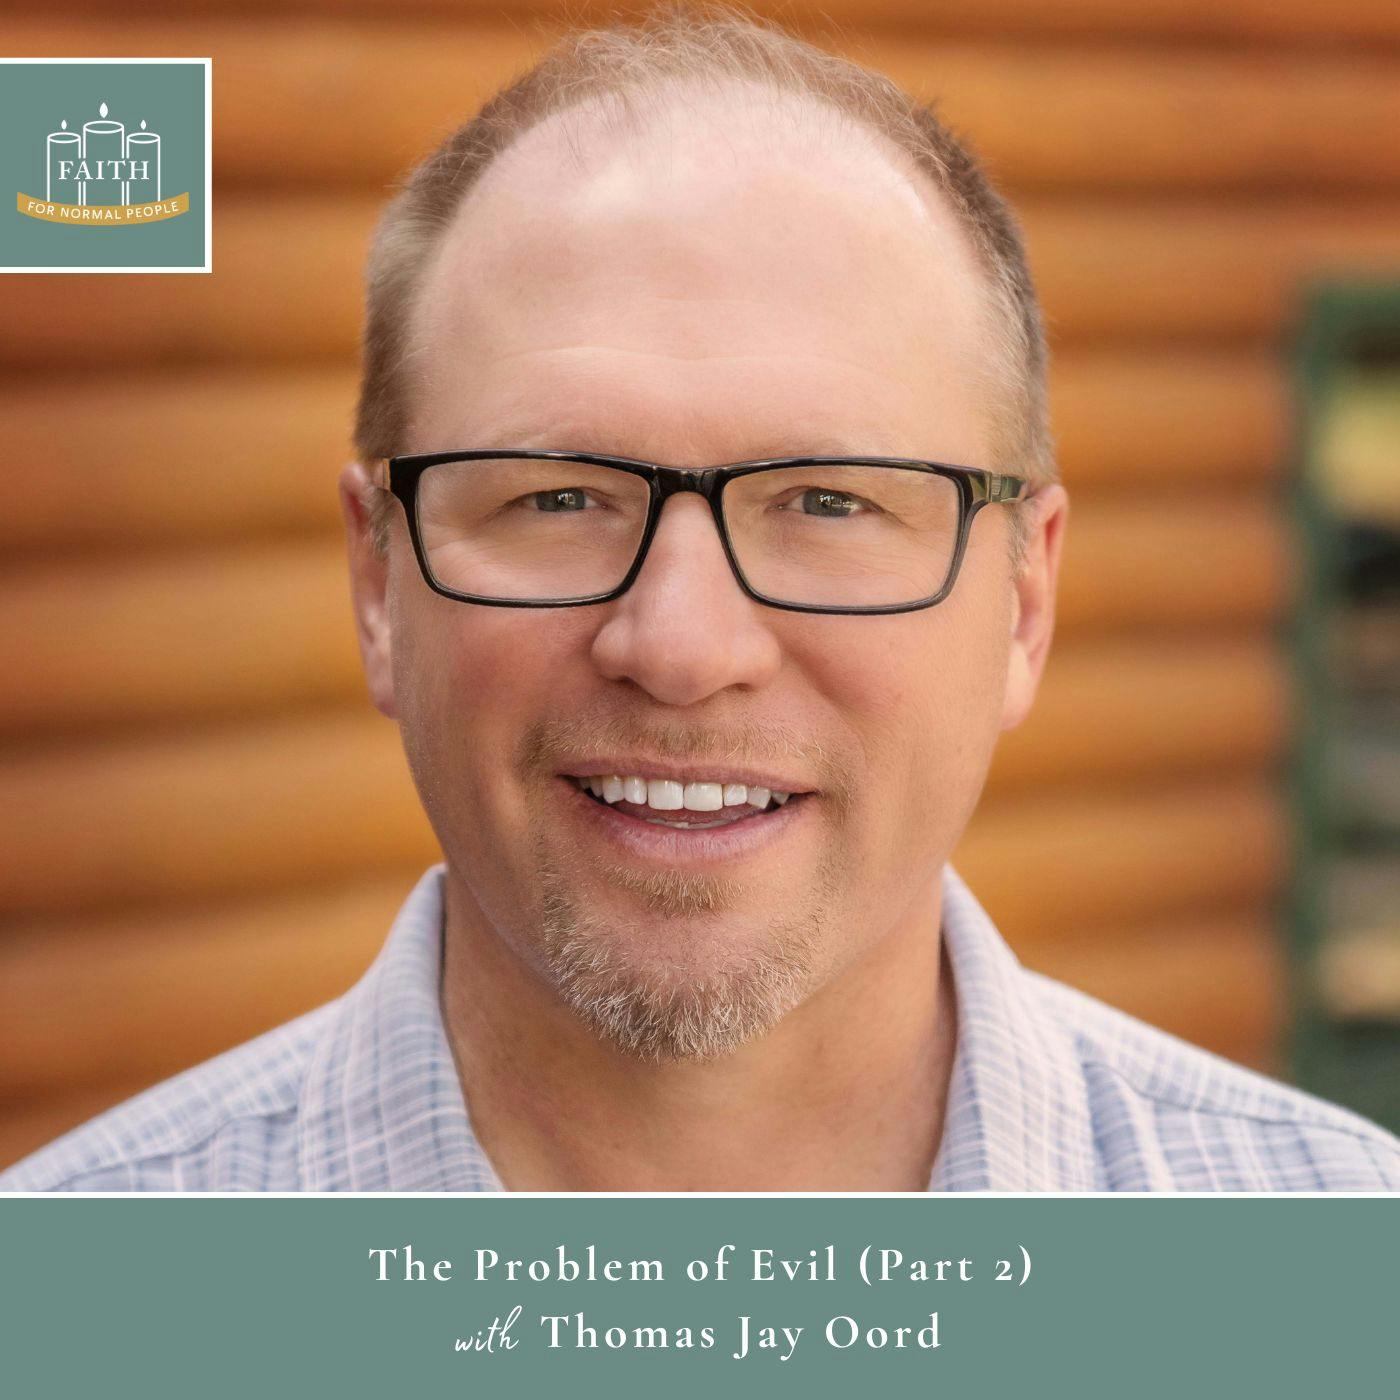 [Faith] Episode 28: Thomas Jay Oord - The Problem of Evil (Part 2)